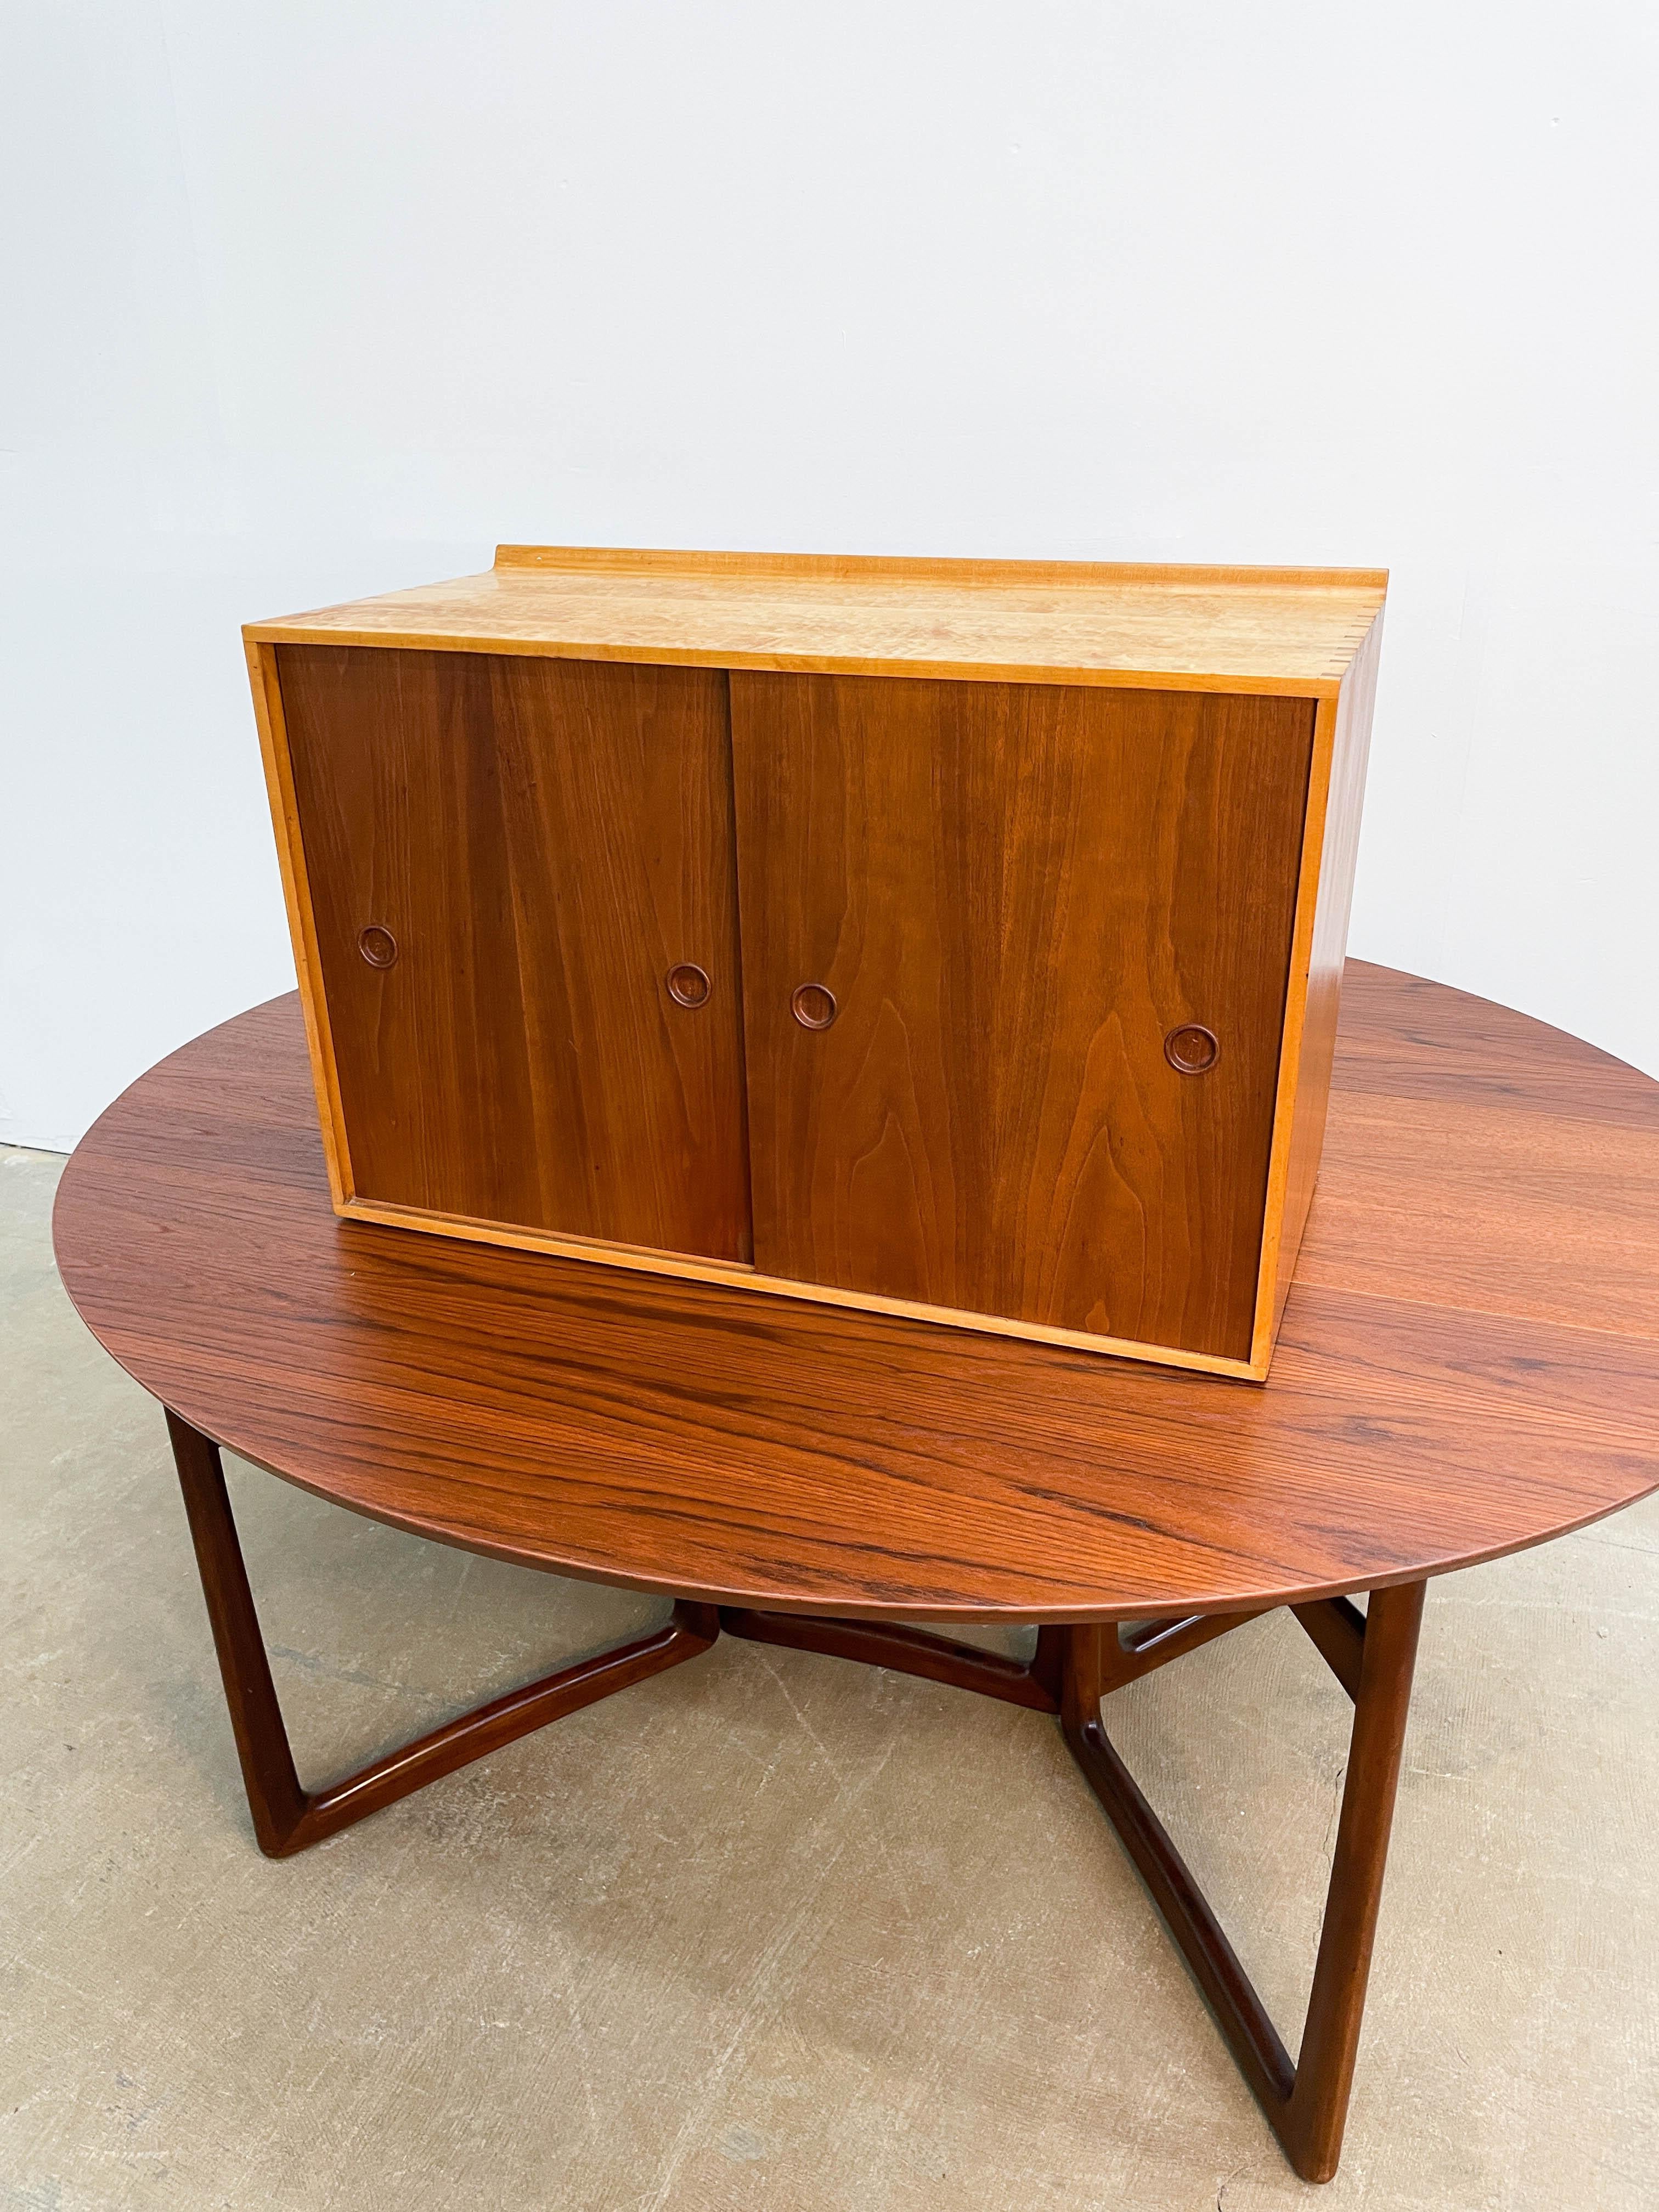 This is a stunning piece of Danish Modern design by the master Finn Juhl. Made in the early 1950s by Baker Furniture, this maple case wall-hung cabinet has distinctive walnut sliding doors and moveable interior shelves.

The cabinet comes with two